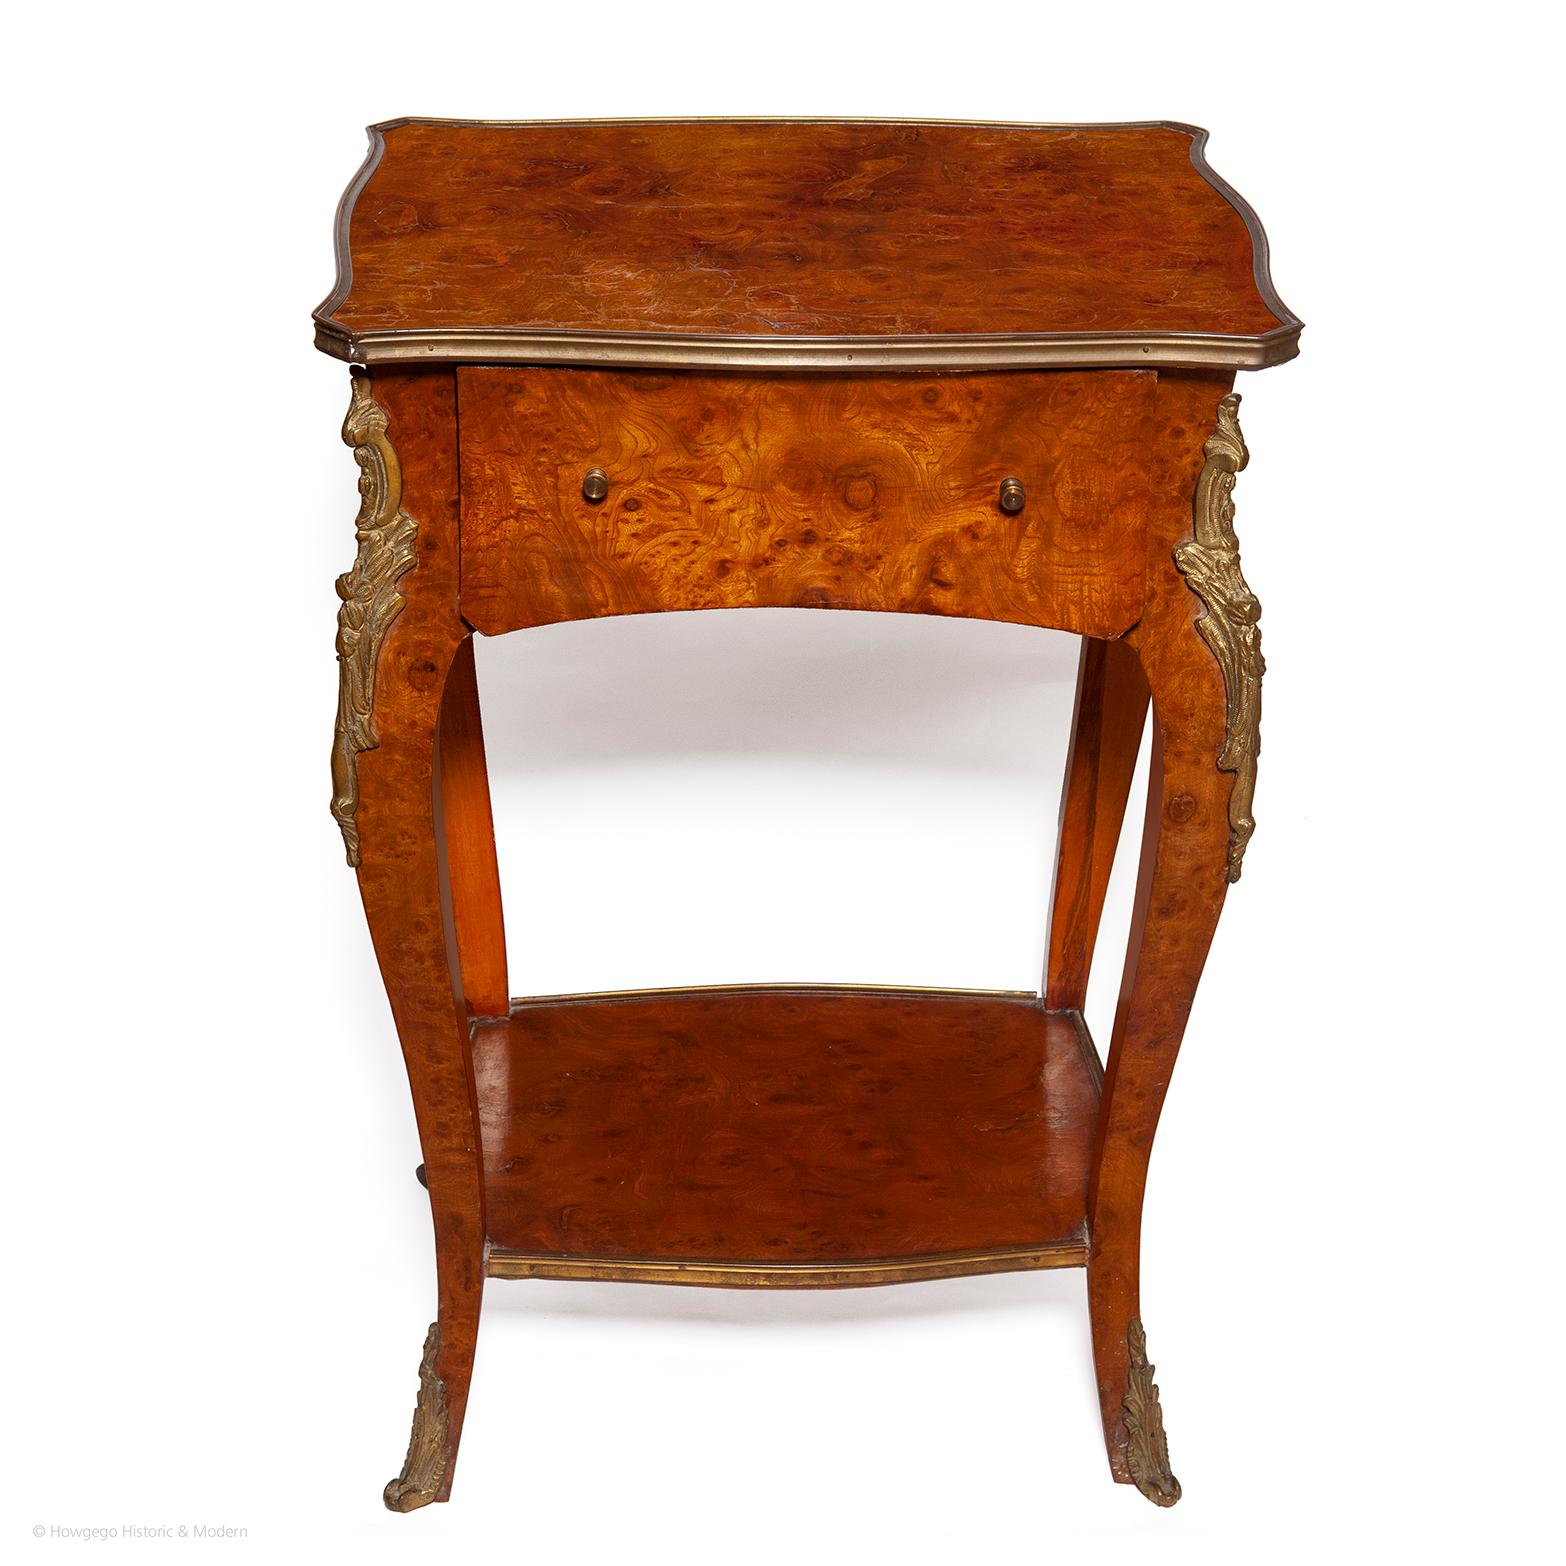 - Elegant small size and sweeping form
- Stunning burr walnut veneers, rich color and patina
- Sophisticated gilt bronze band and acanthus leaf mounts
- Injects gravitas into any interior
- Perfect for a boudoir, dressing room, bedroom, living